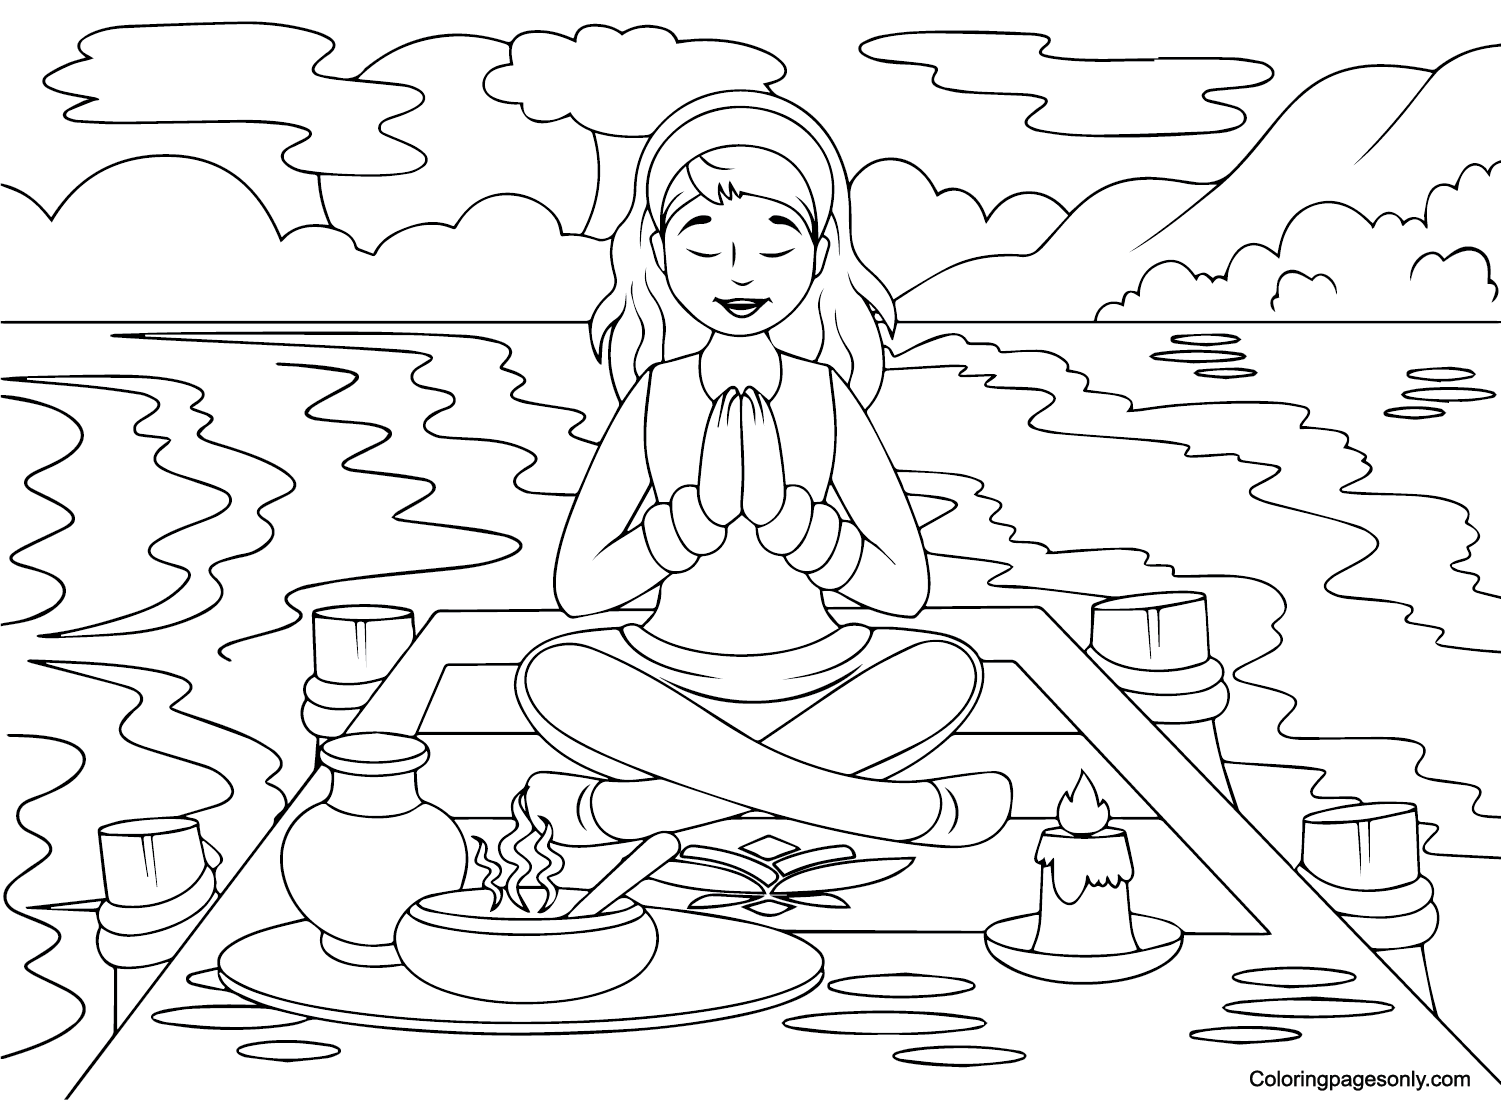 Images Mindfulness Coloring Pages